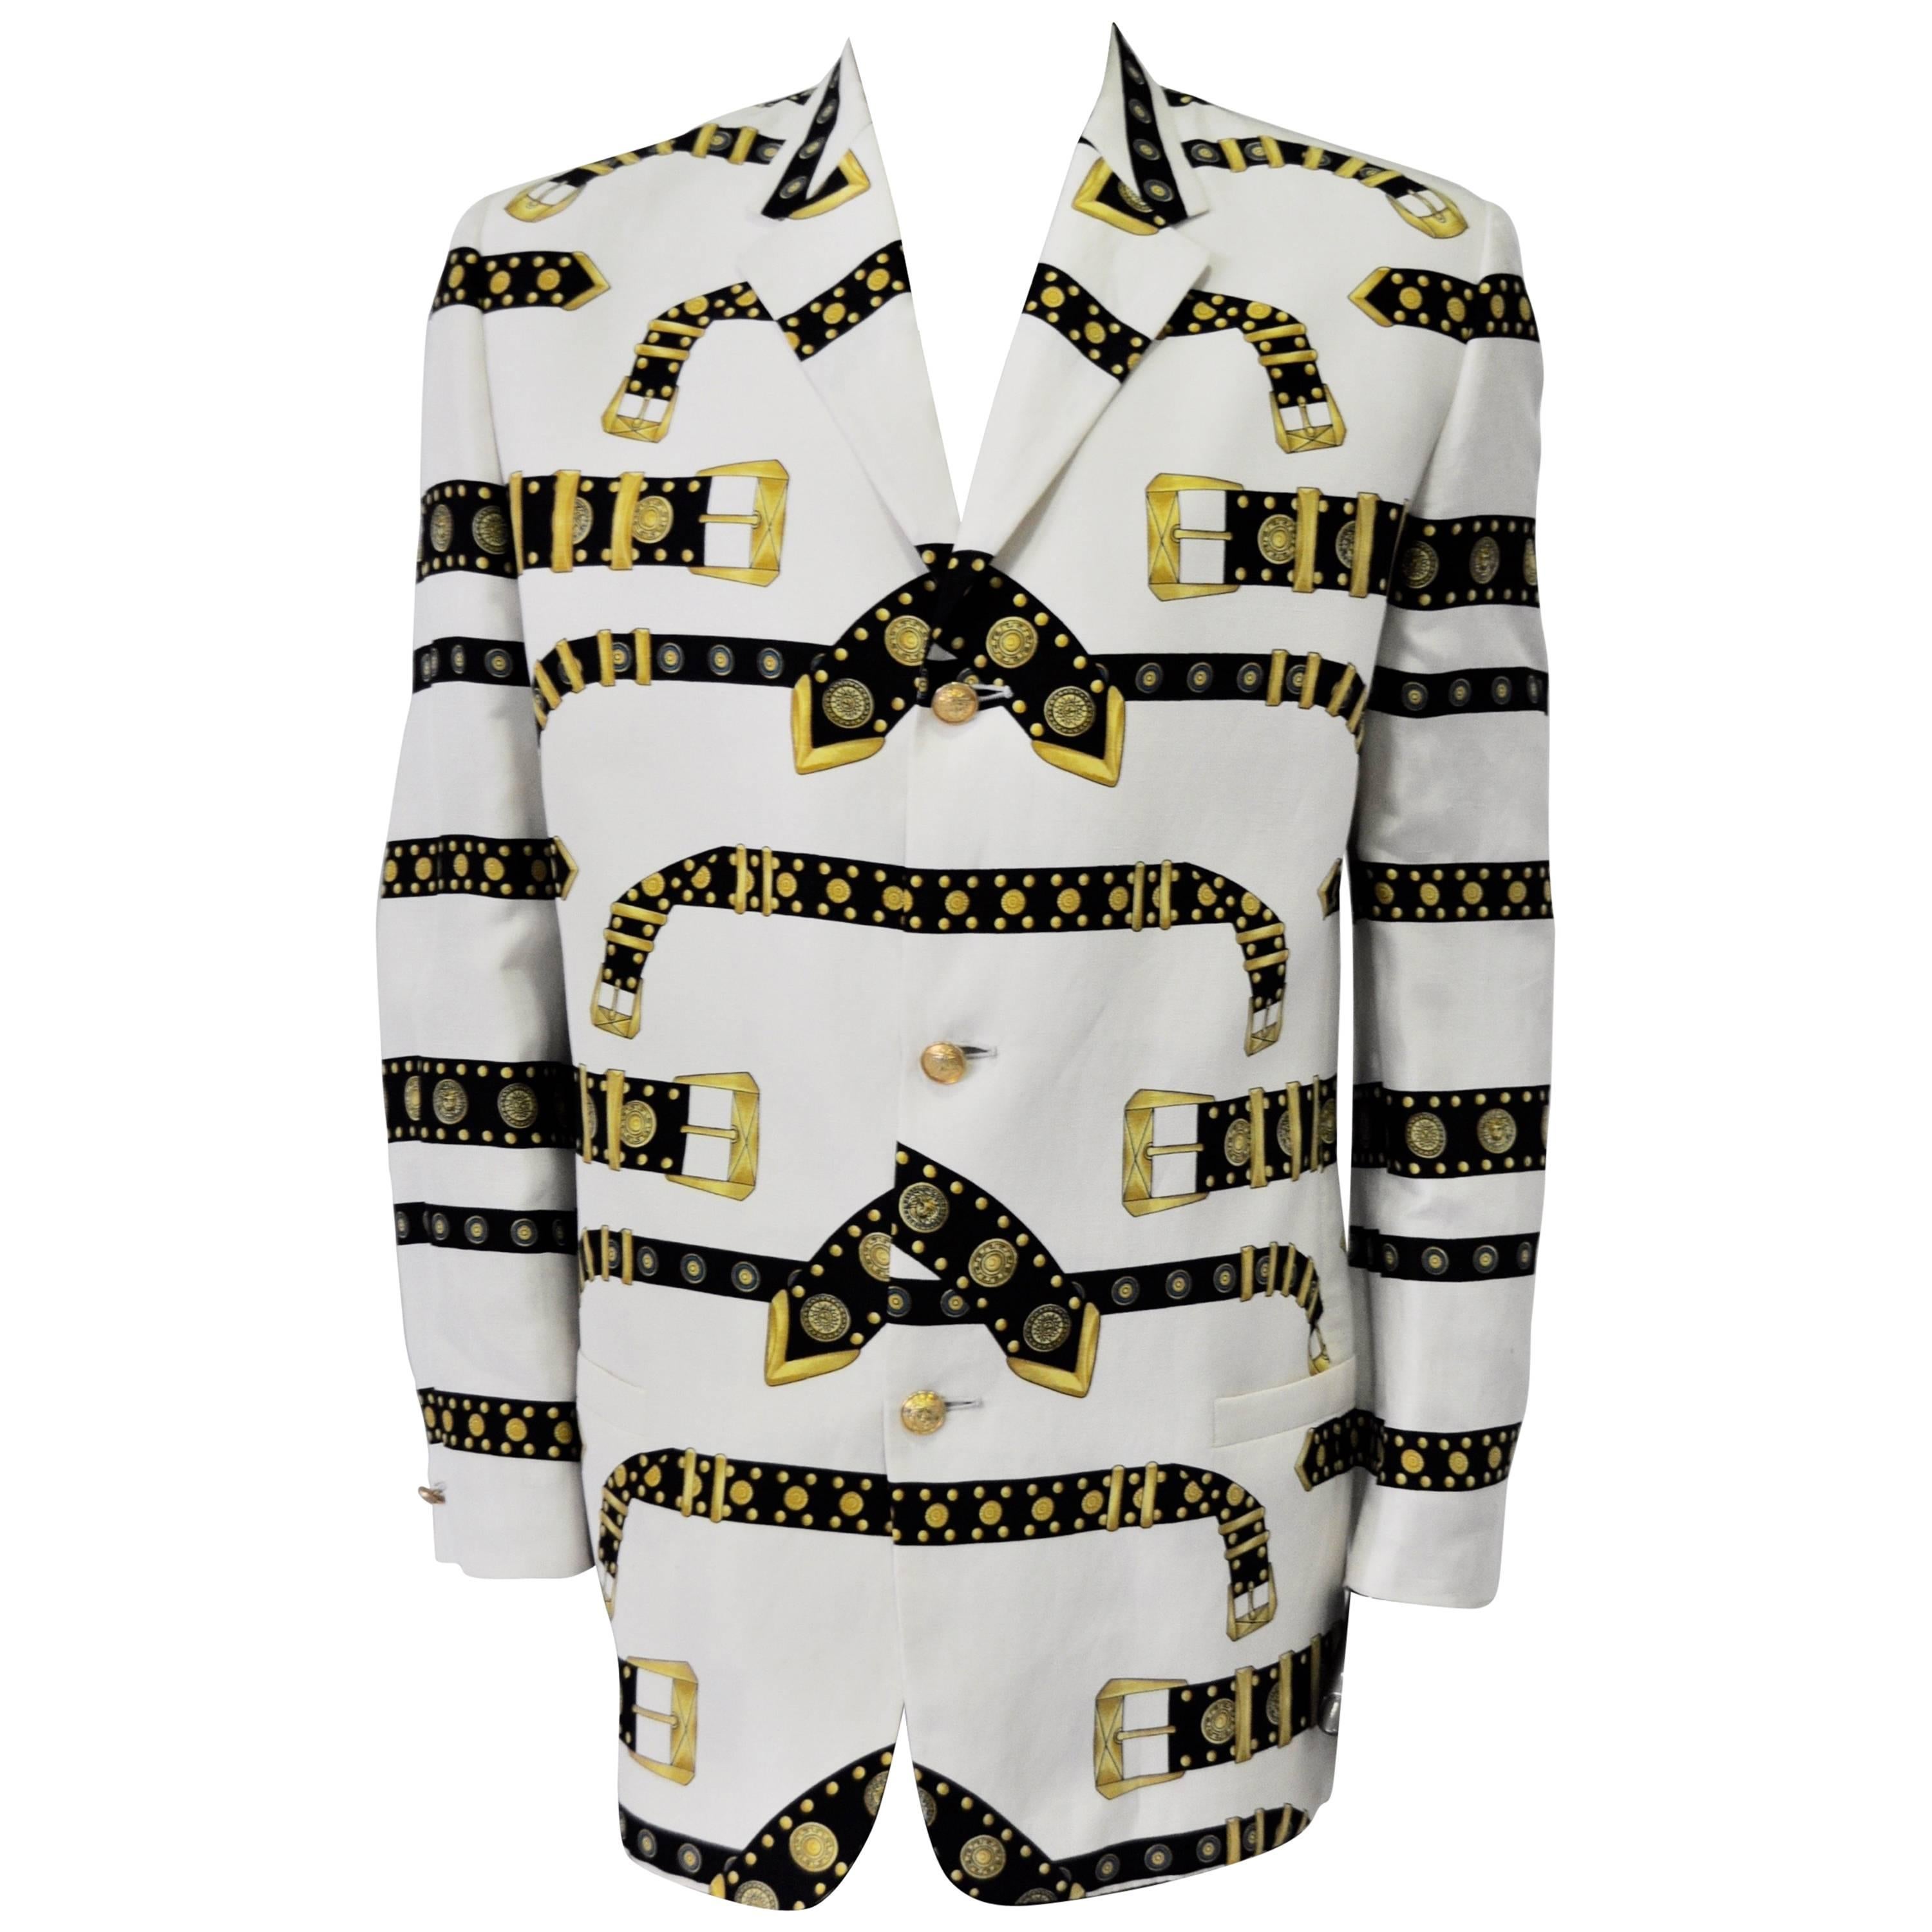 Iconic and Rare Gianni Versace Studded Belt Print Linen Men's Jacket For Sale